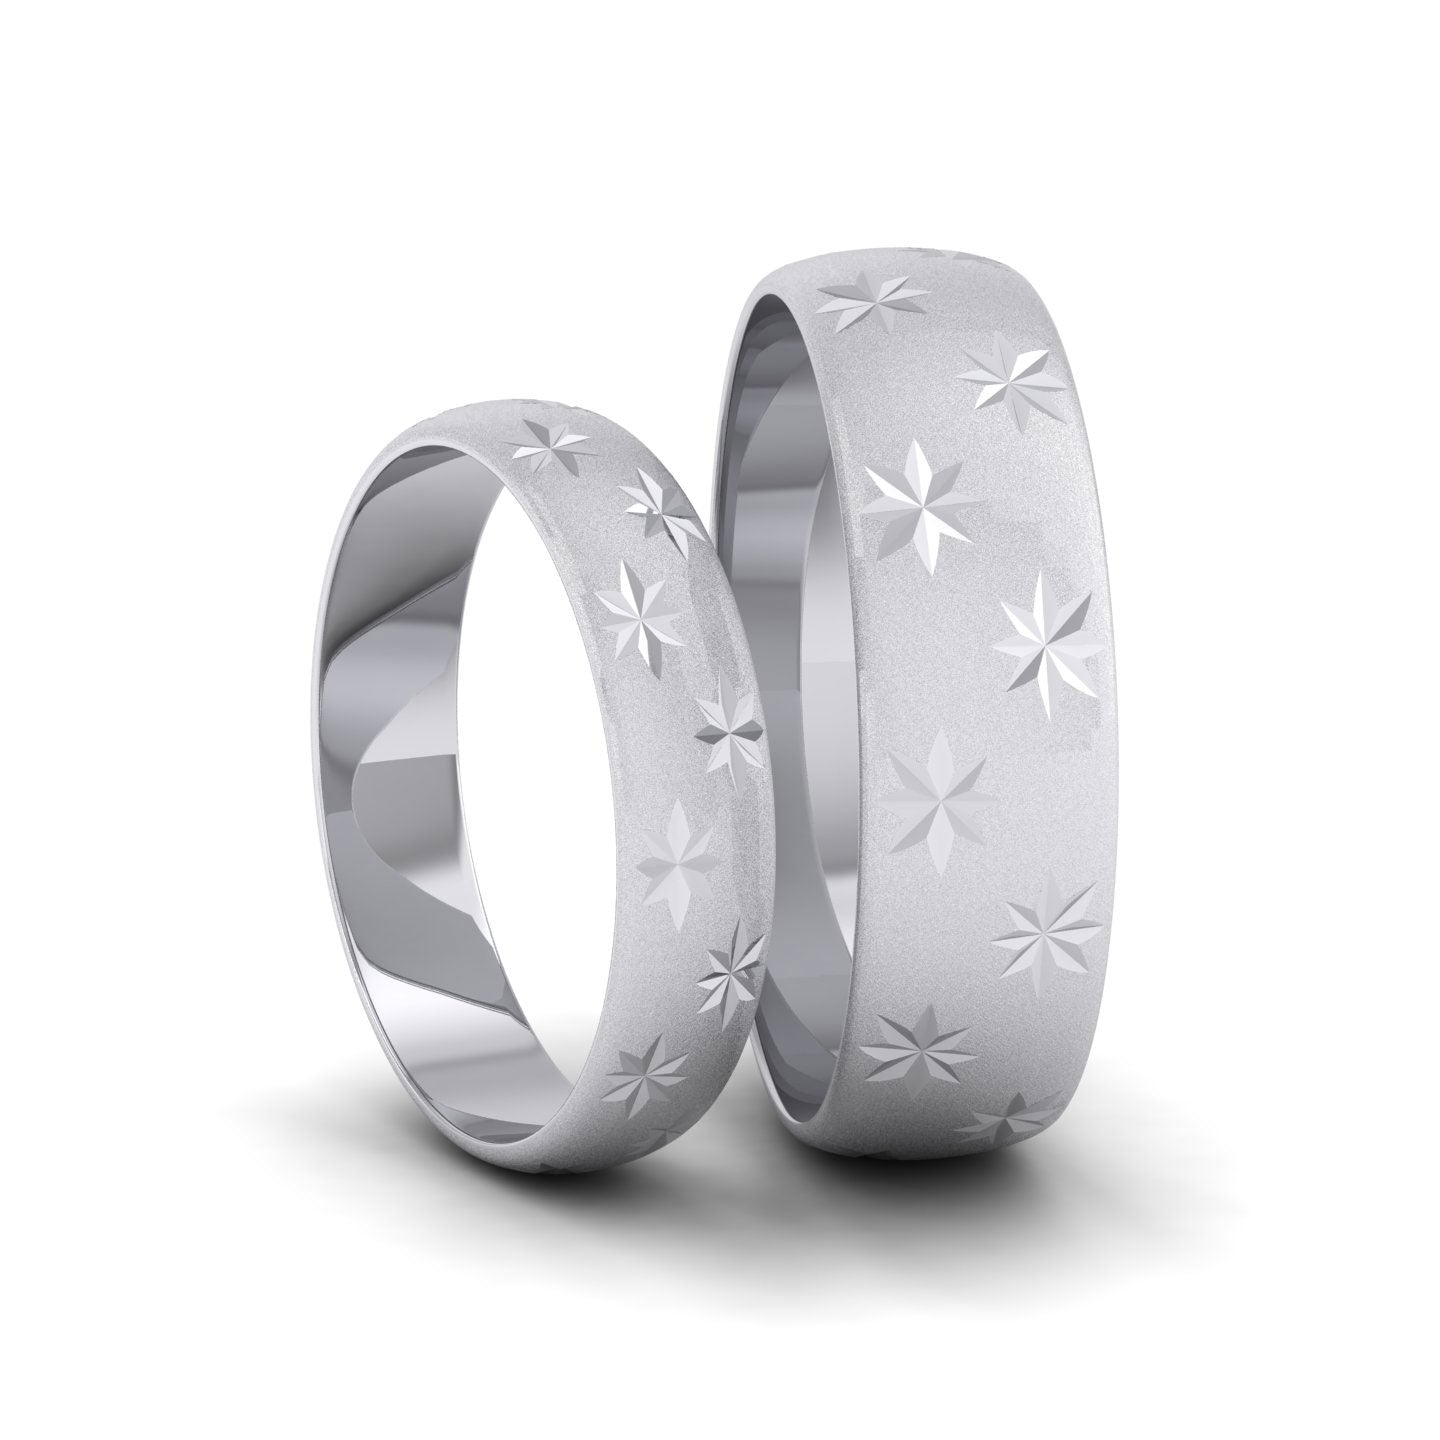 Star Patterned 14ct White Gold 6mm Wedding Ring